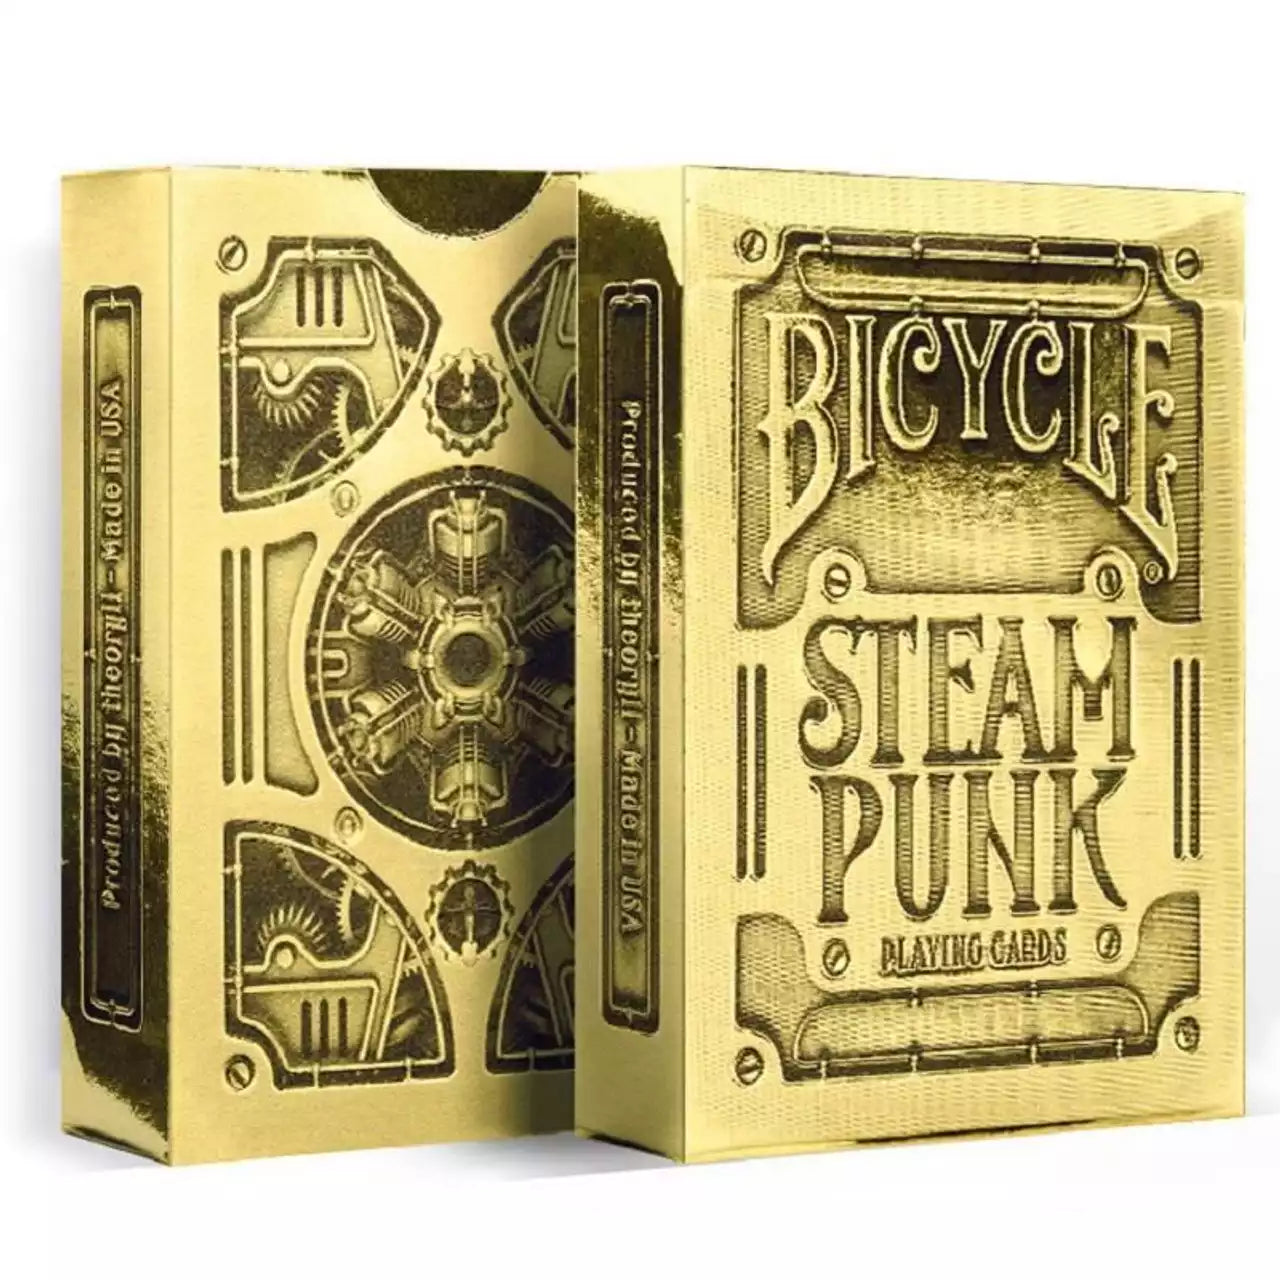 Bicycle Steampunk Gold Playing Cards - Eclipse Games Puzzles Novelties